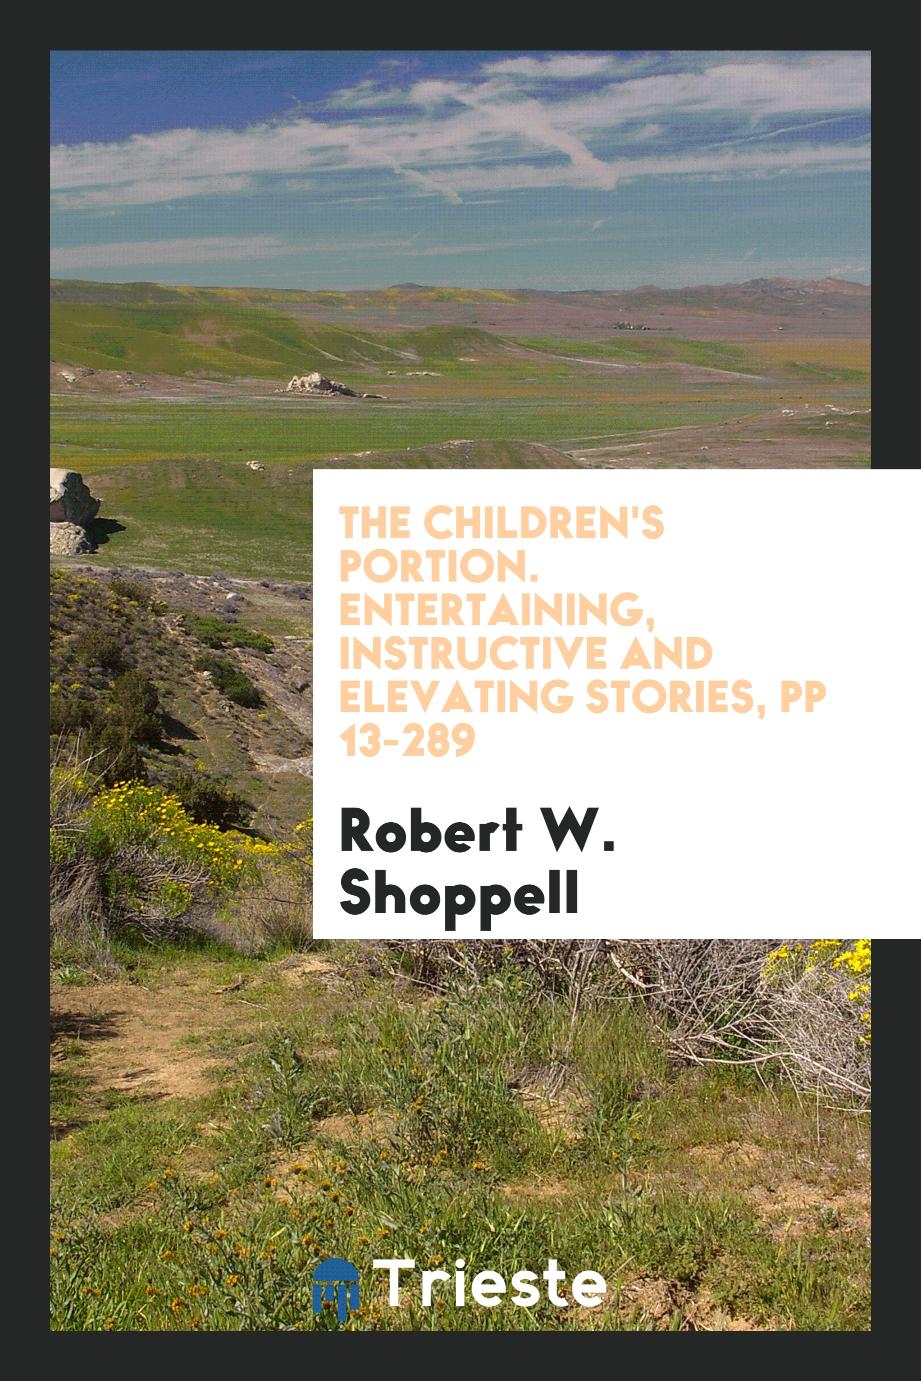 The Children's portion. Entertaining, instructive and elevating stories, pp 13-289